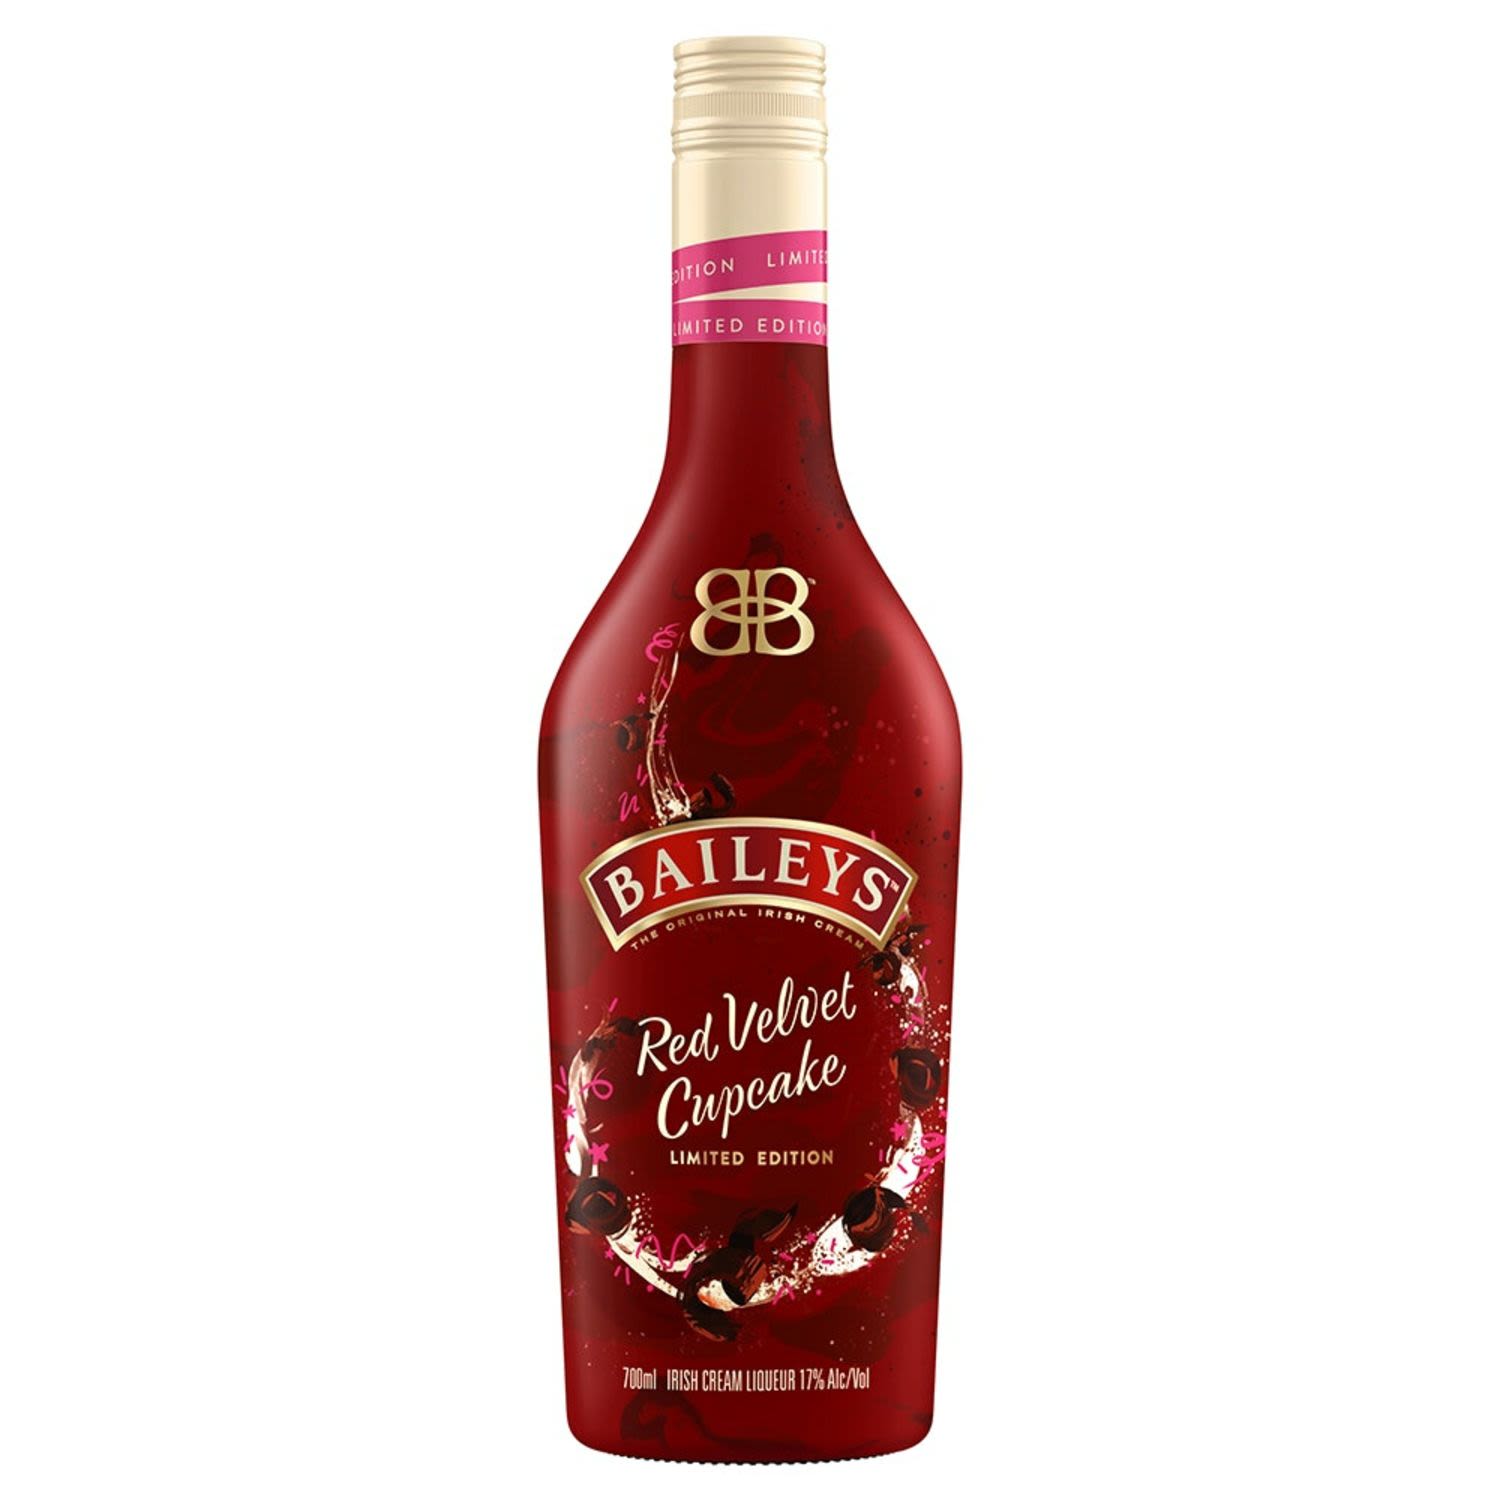 A drink that tastes like a cupcake? It’s what dreams are made of. Red velvet cupcake flavour swirled with mouth-watering Baileys Original Irish Cream and other flavours and ingredients, a cake-inspired liqueur treat straight out of the bakeshop. Enjoy over ice, as a shot or as a grown-up baking boost. You can have your cupcake and drink it too!<br /> <br />Alcohol Volume: 17.00%<br /><br />Pack Format: Bottle<br /><br />Standard Drinks: 9.4</br /><br />Pack Type: Bottle<br /><br />Country of Origin: Ireland<br />